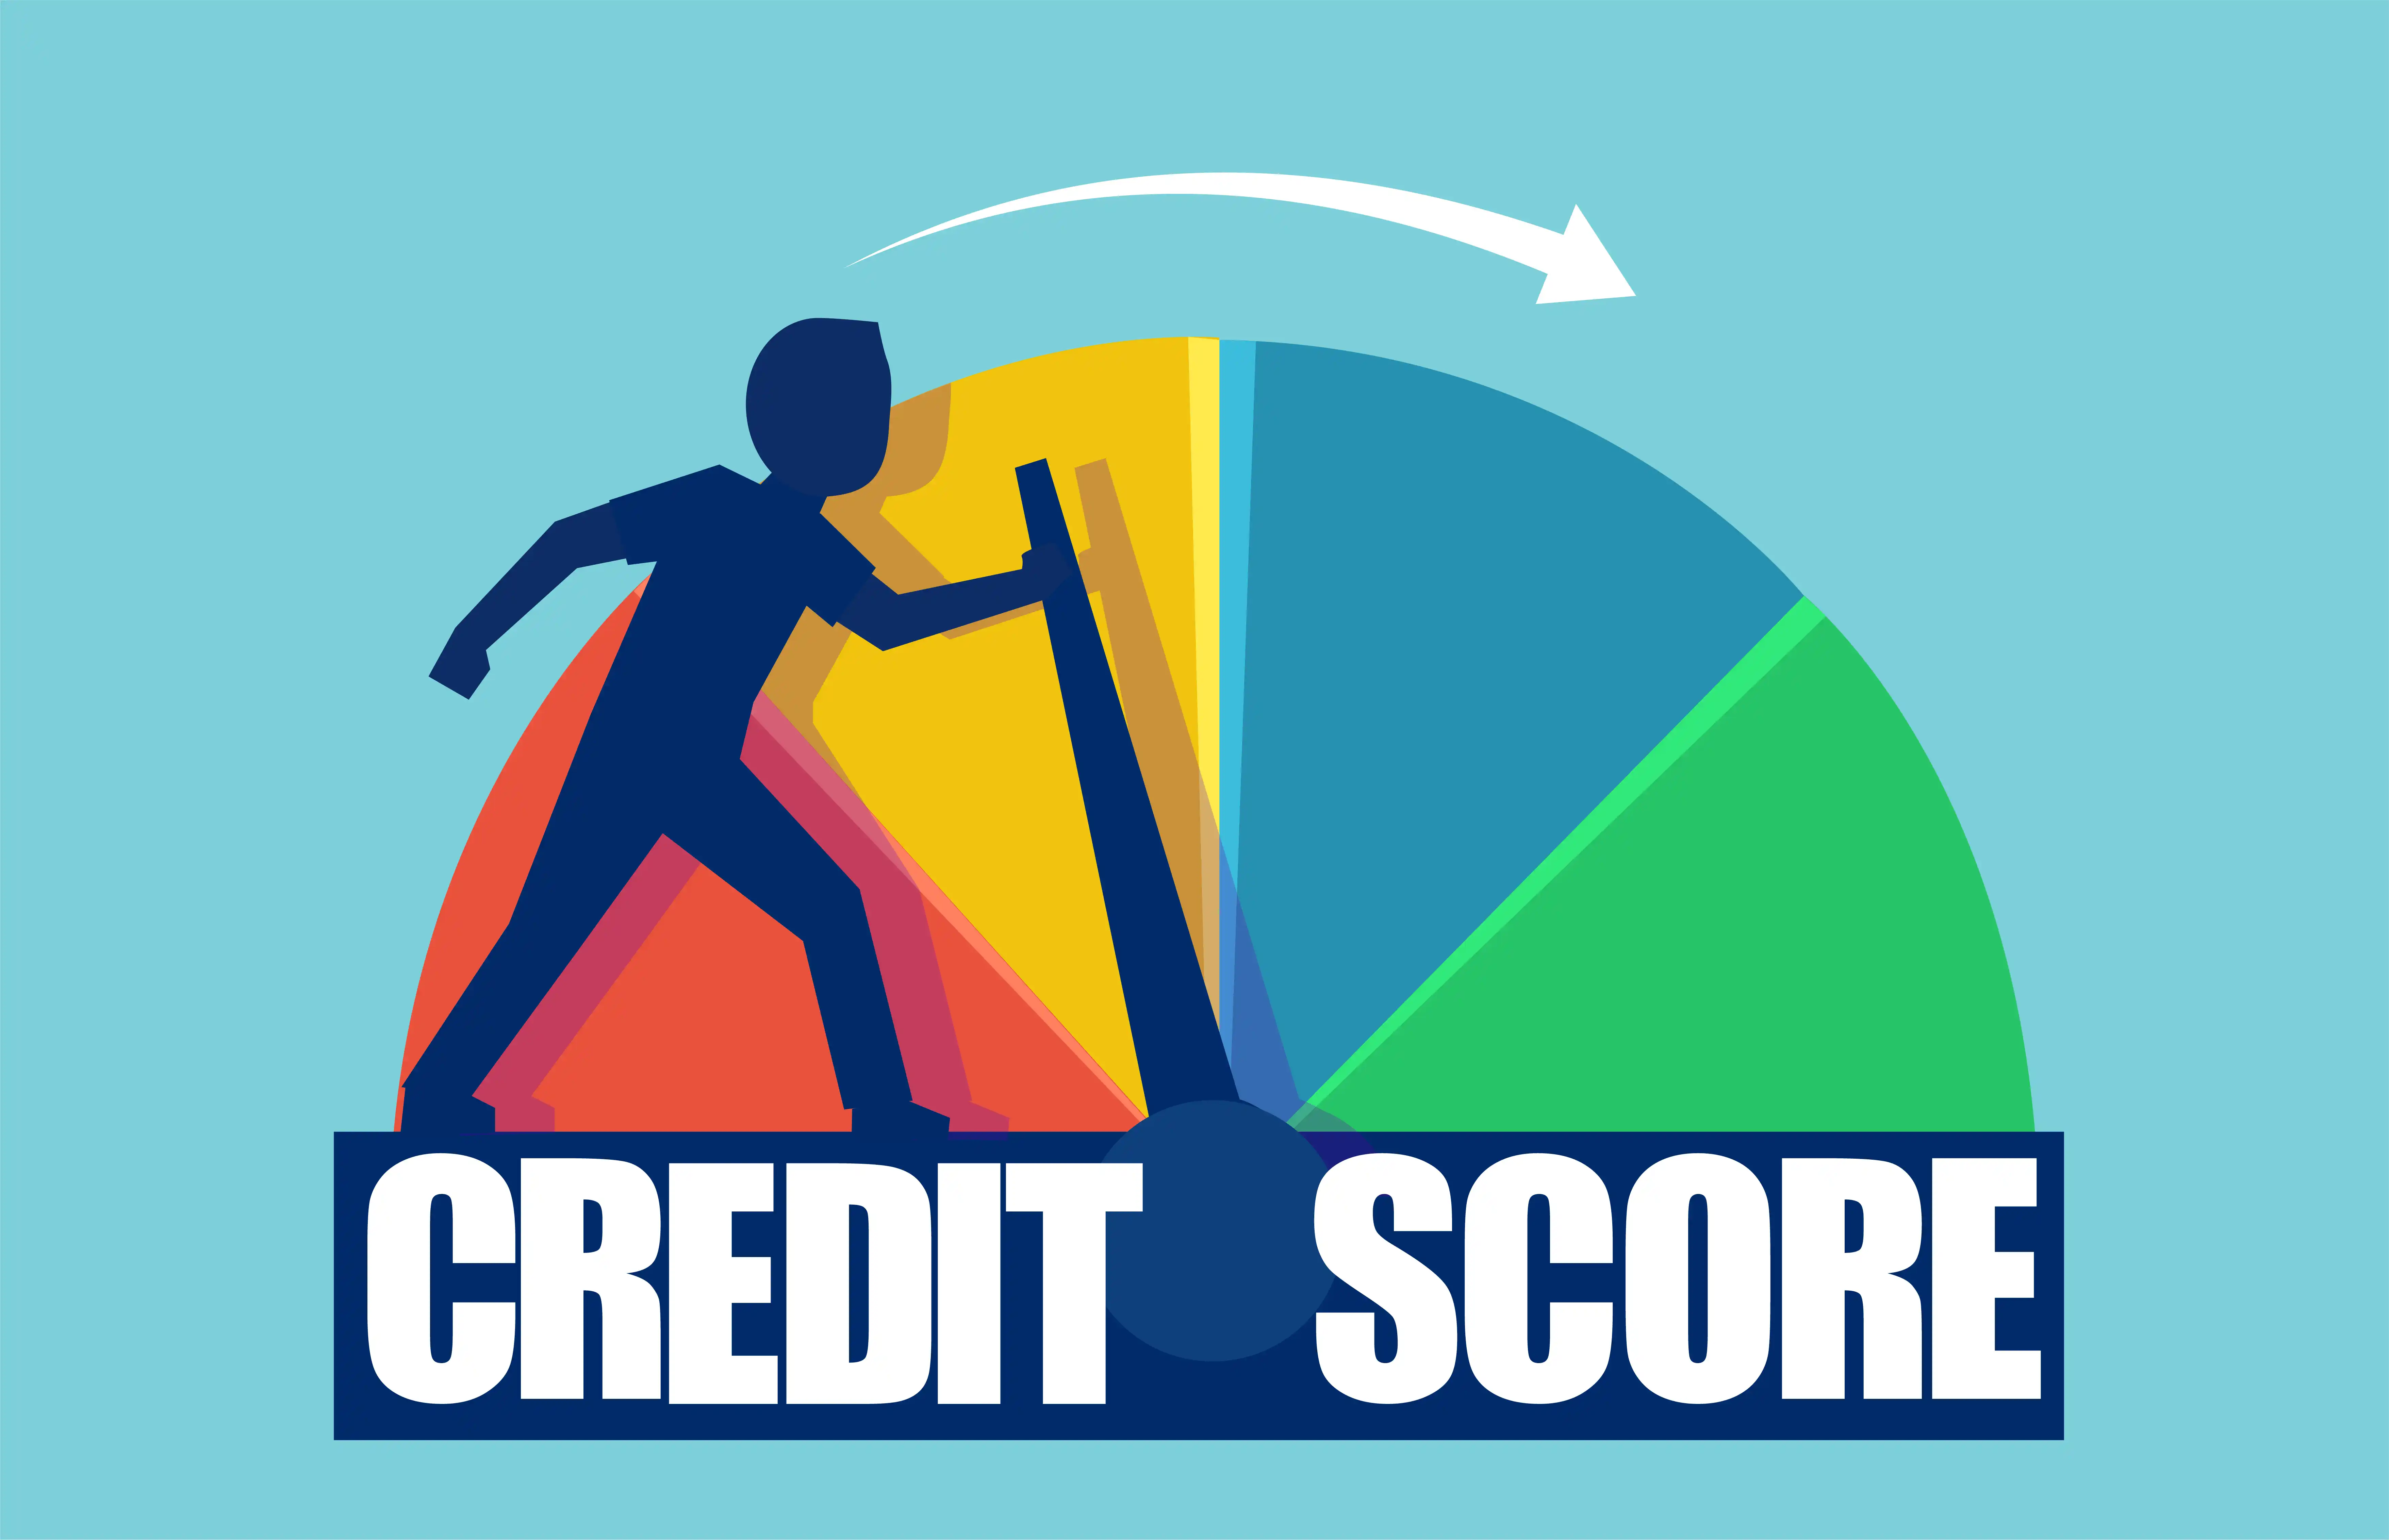 How to Raise Your Credit Score